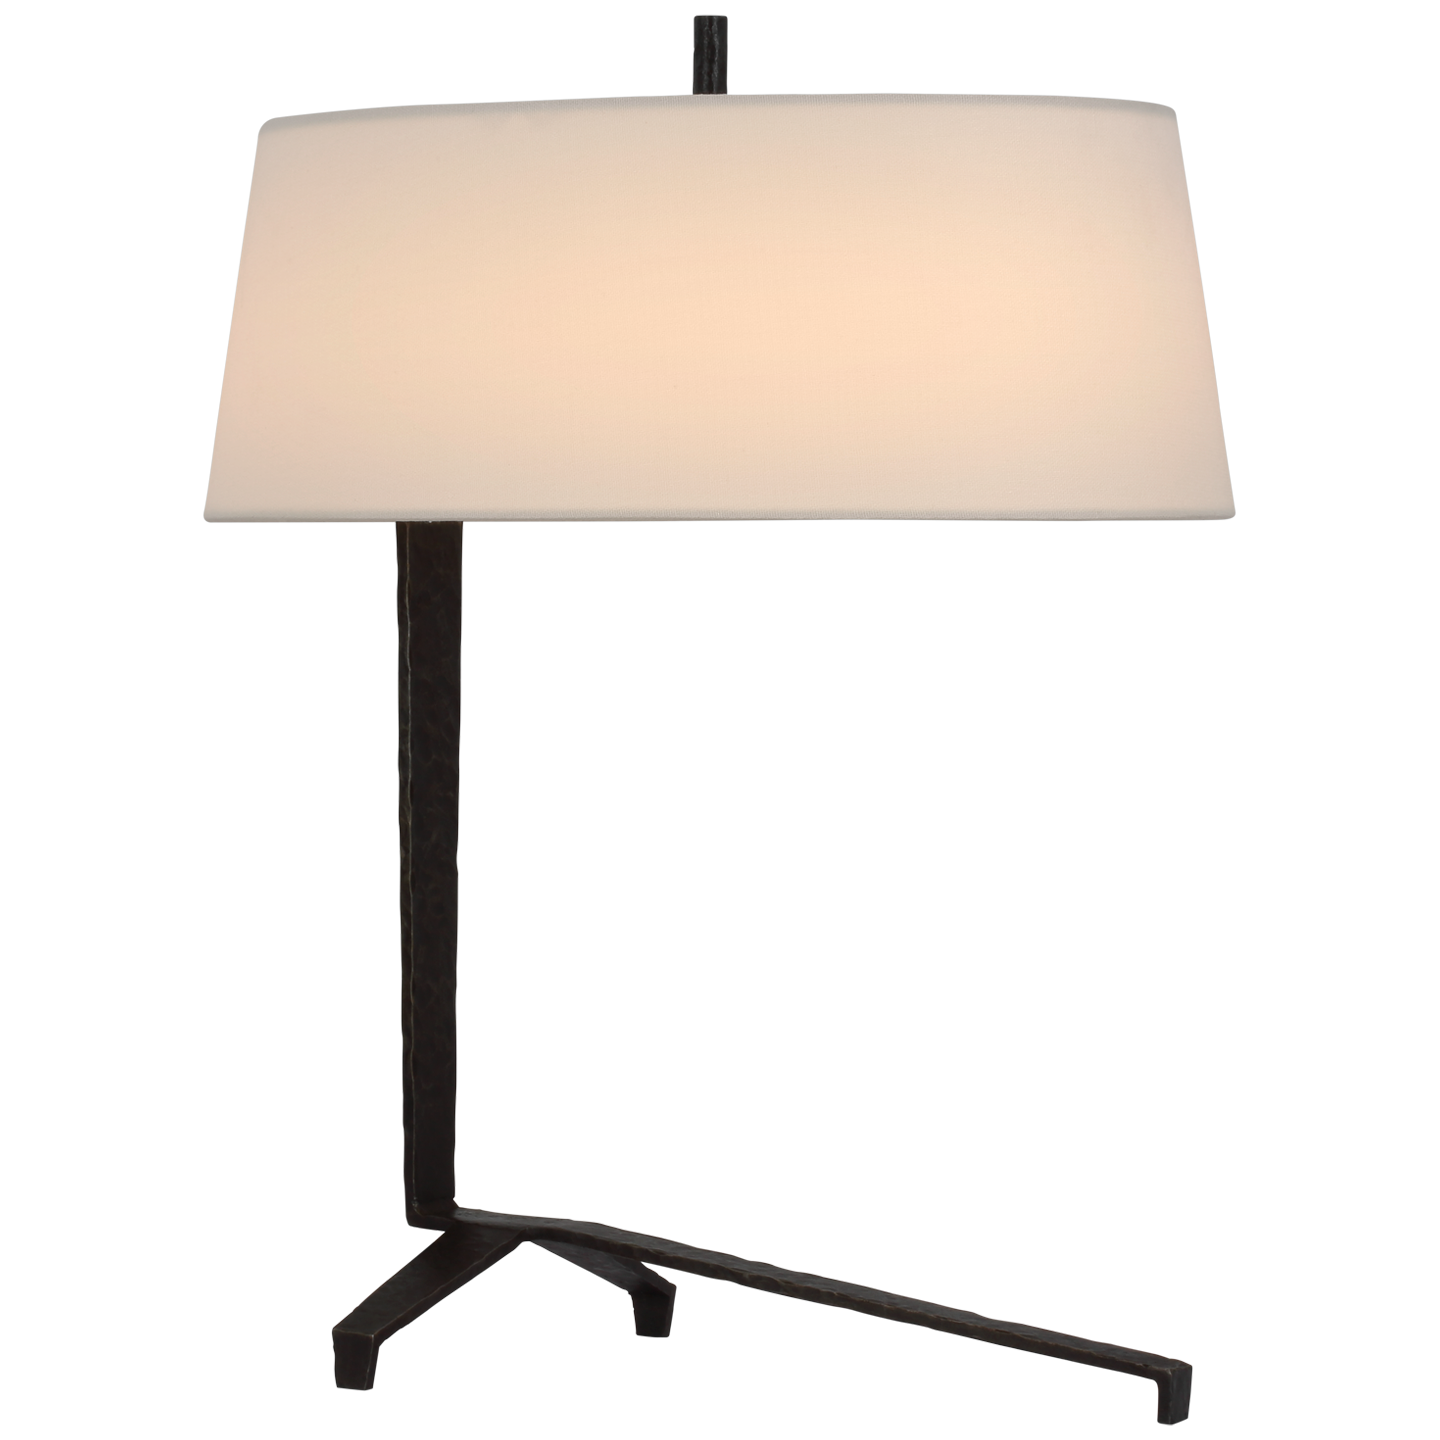 Francesco Accent Lamp in Aged Iron with Linen Shade